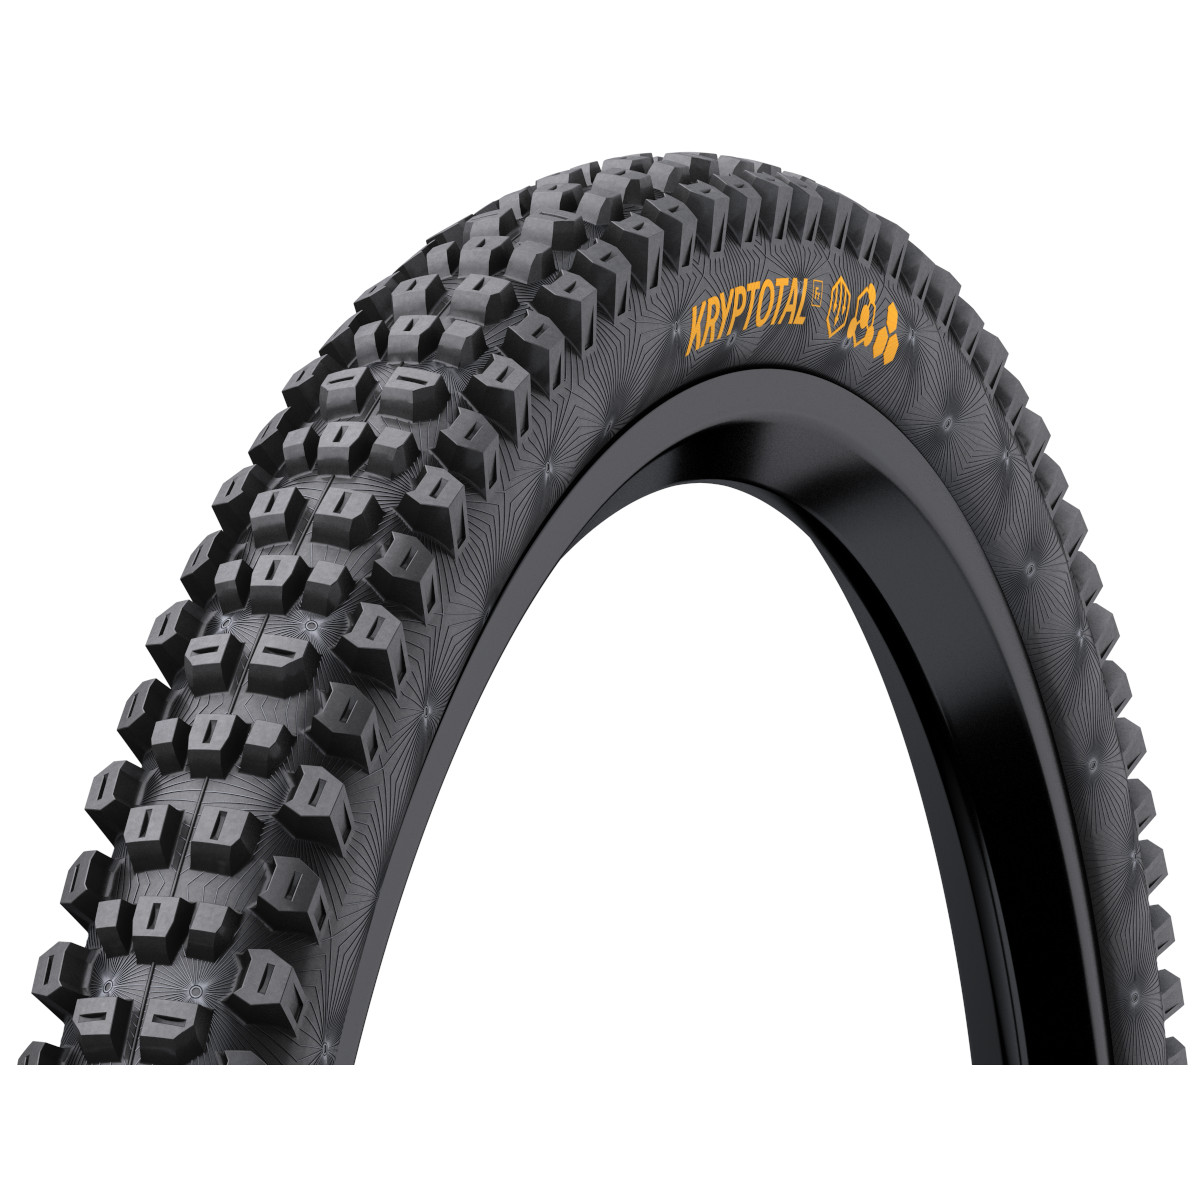 Image of Continental Kryptotal Fr - Downhill SuperSoft - MTB Folding Tire - 29x2.40"